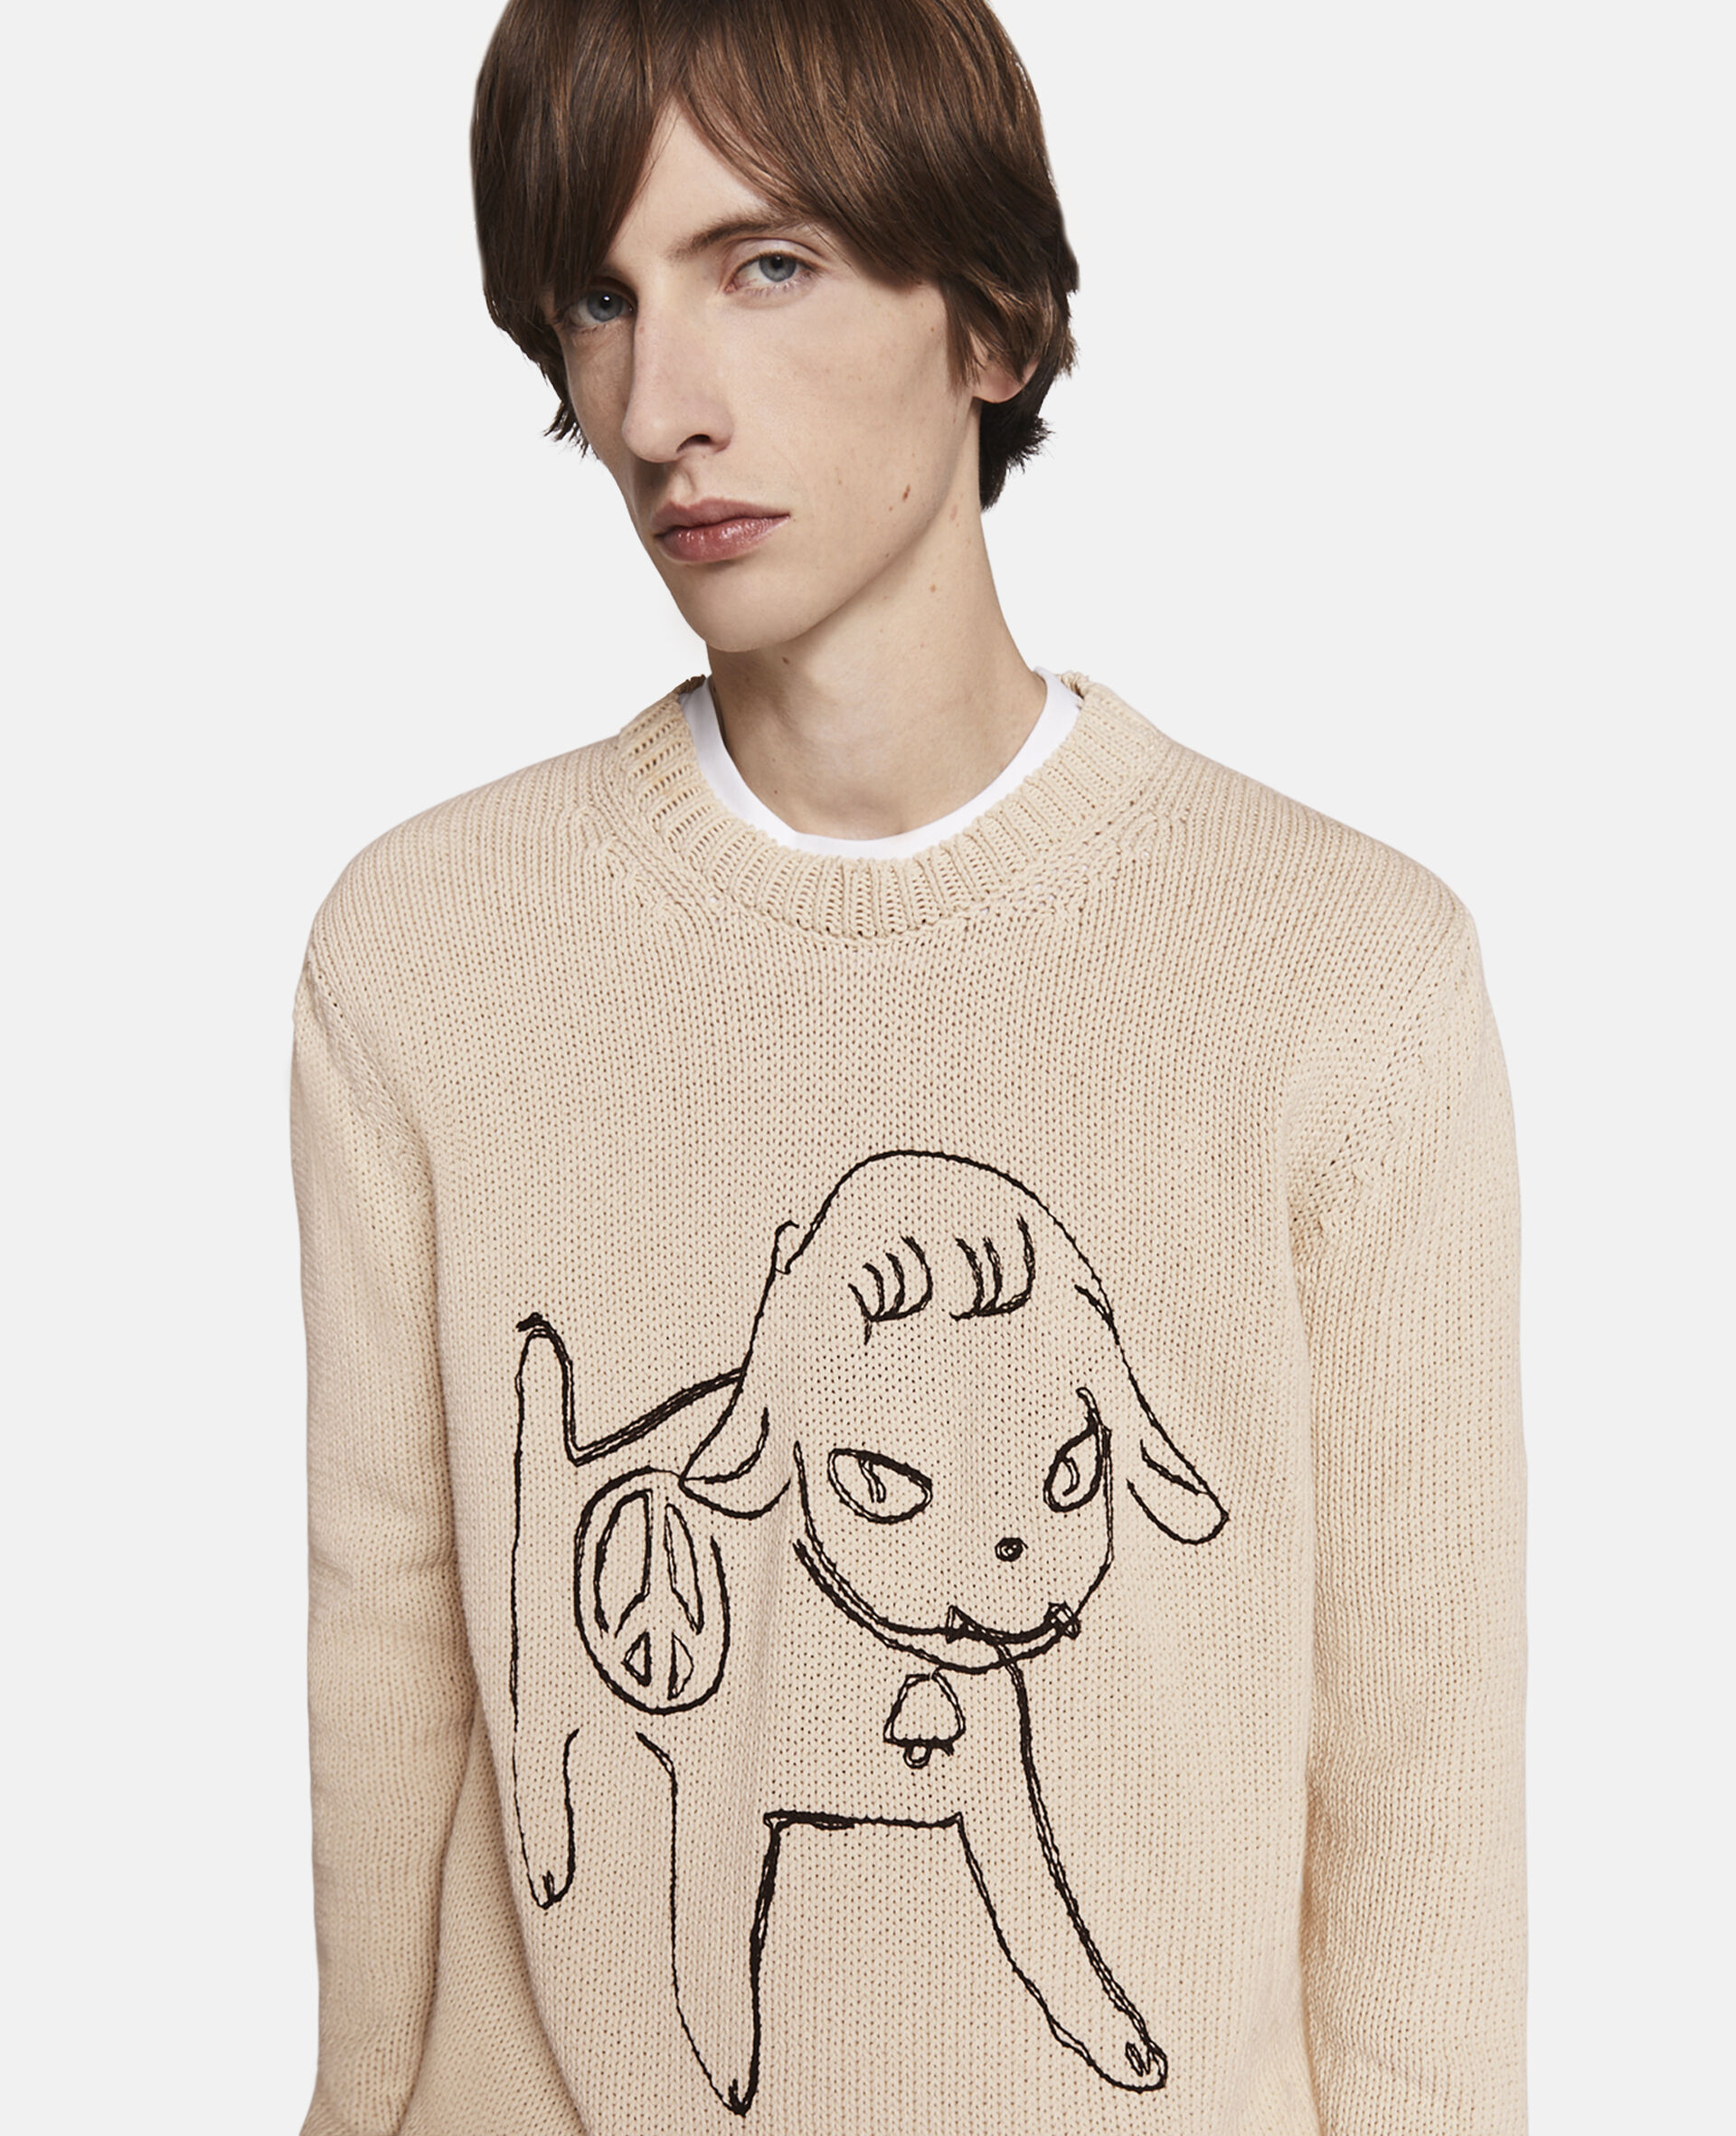 Sheep Embroidery Cotton Sweatshirt-Beige-large image number 4